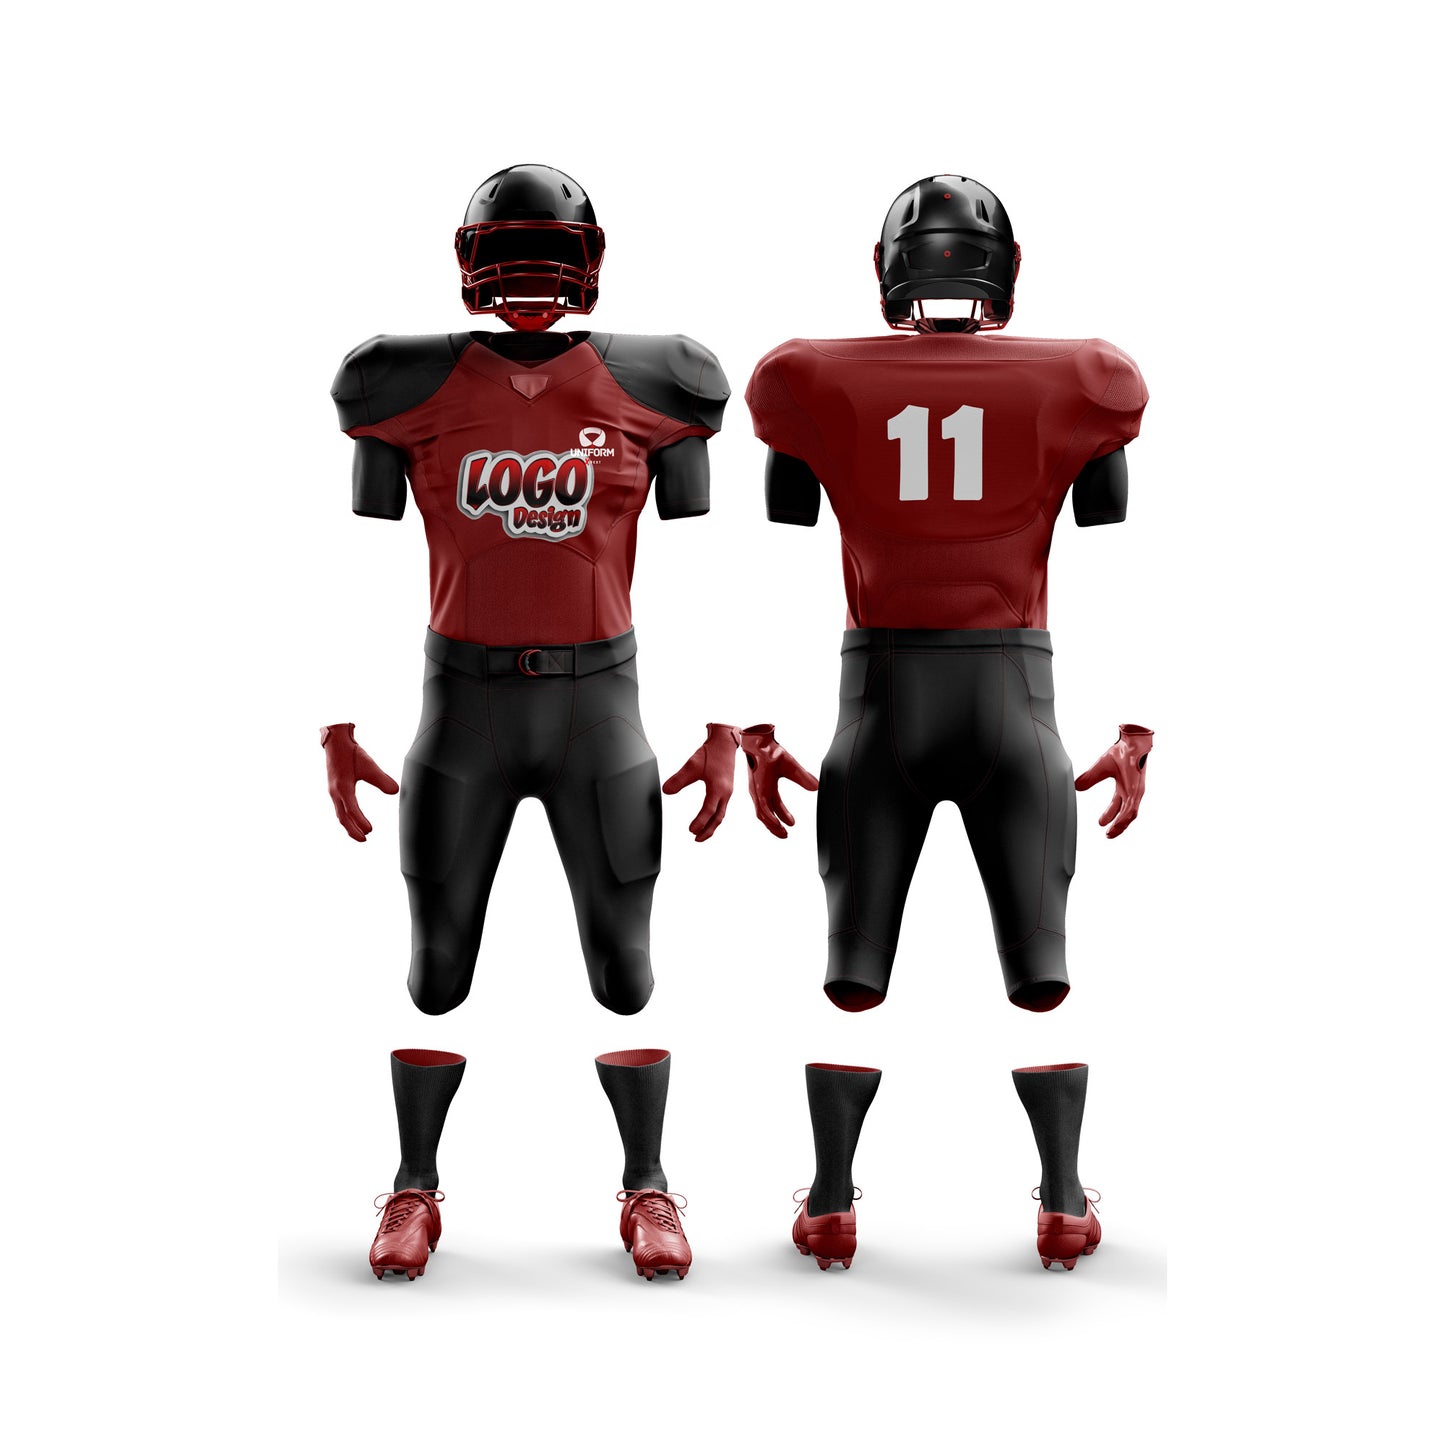 Uniform Xpert American Football Uniform: Elite gear designed for gridiron champions, featuring durable materials, advanced performance technology, and a sleek, professional look for ultimate comfort and style on the field.